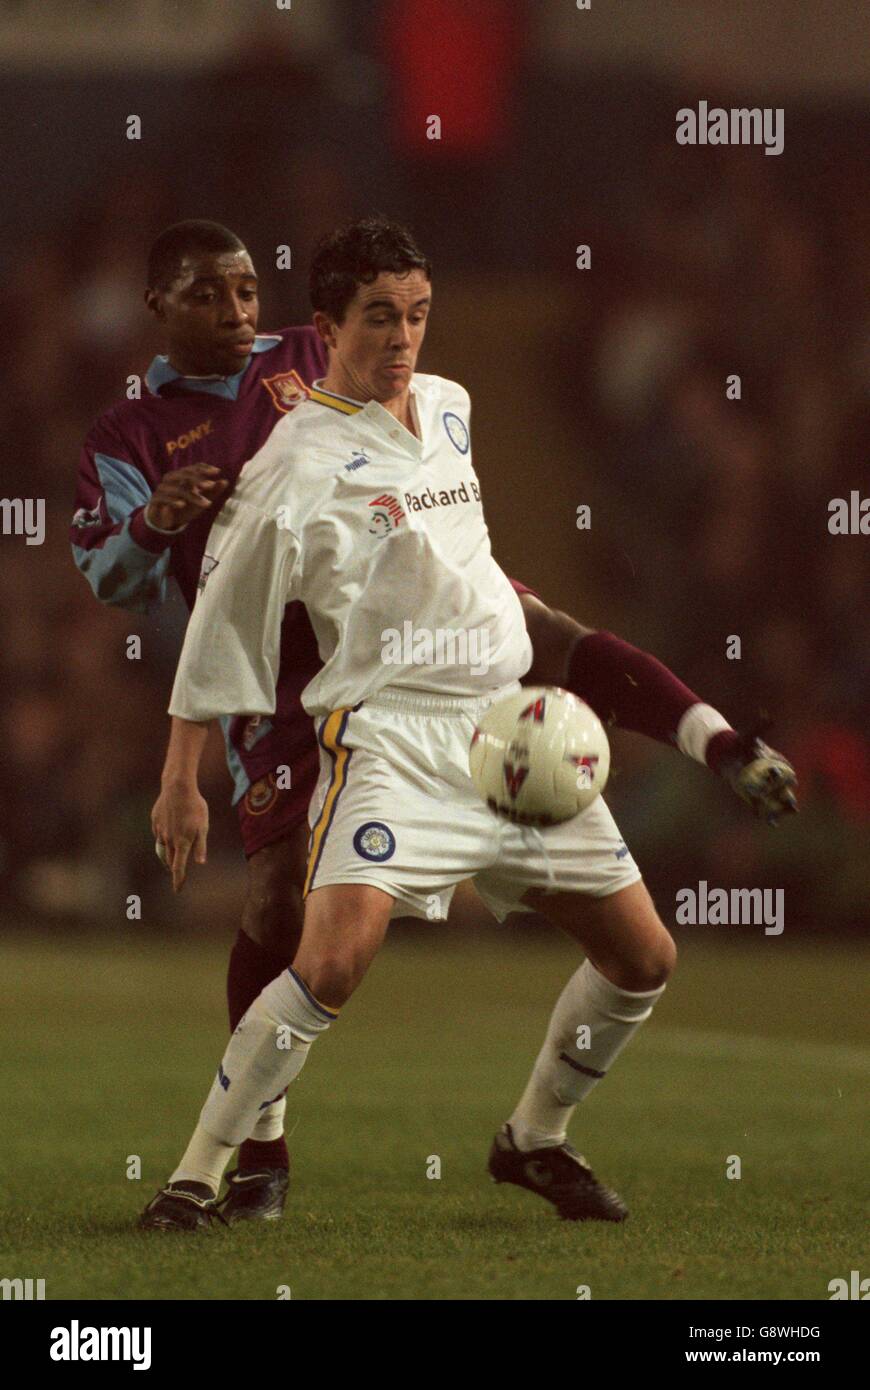 Soccer - FA Carling Premiership - Leeds United v West Ham United. Leeds United's Gary Kelly (right) shields the ball from West Ham United's Andy Impey (left) Stock Photo